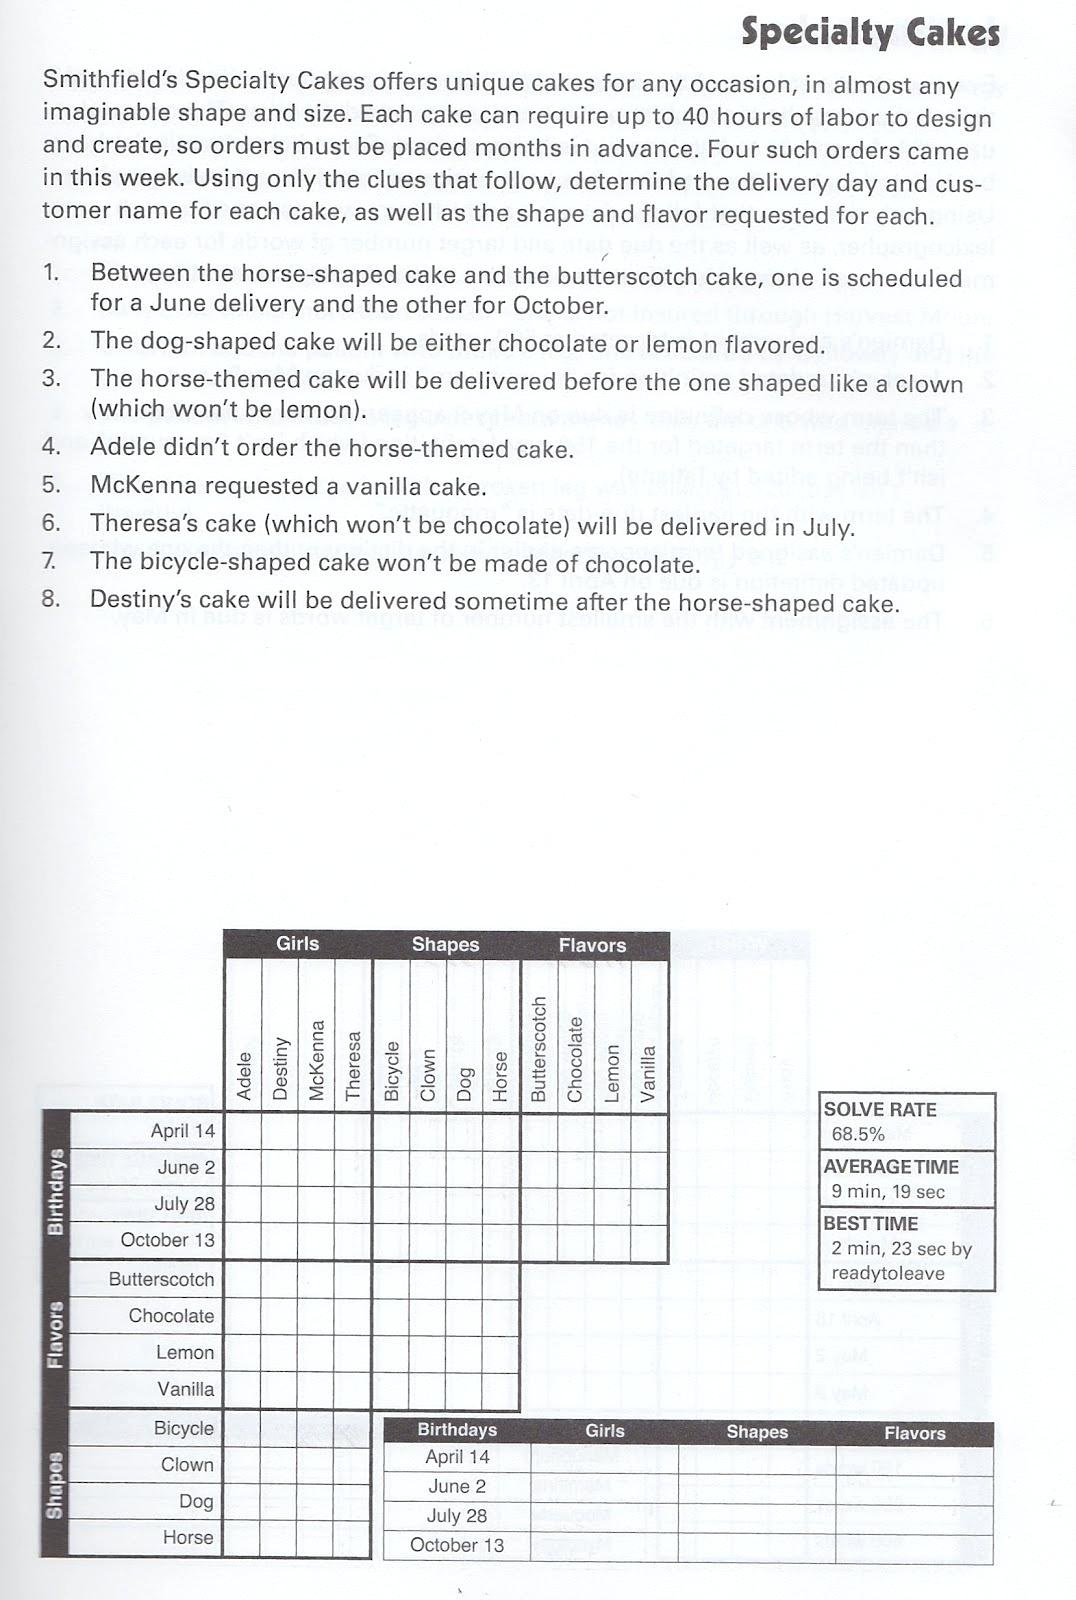 Printable Grid Logic Puzzles – Androidstarter.club - Free Printable Logic Puzzles For Middle School